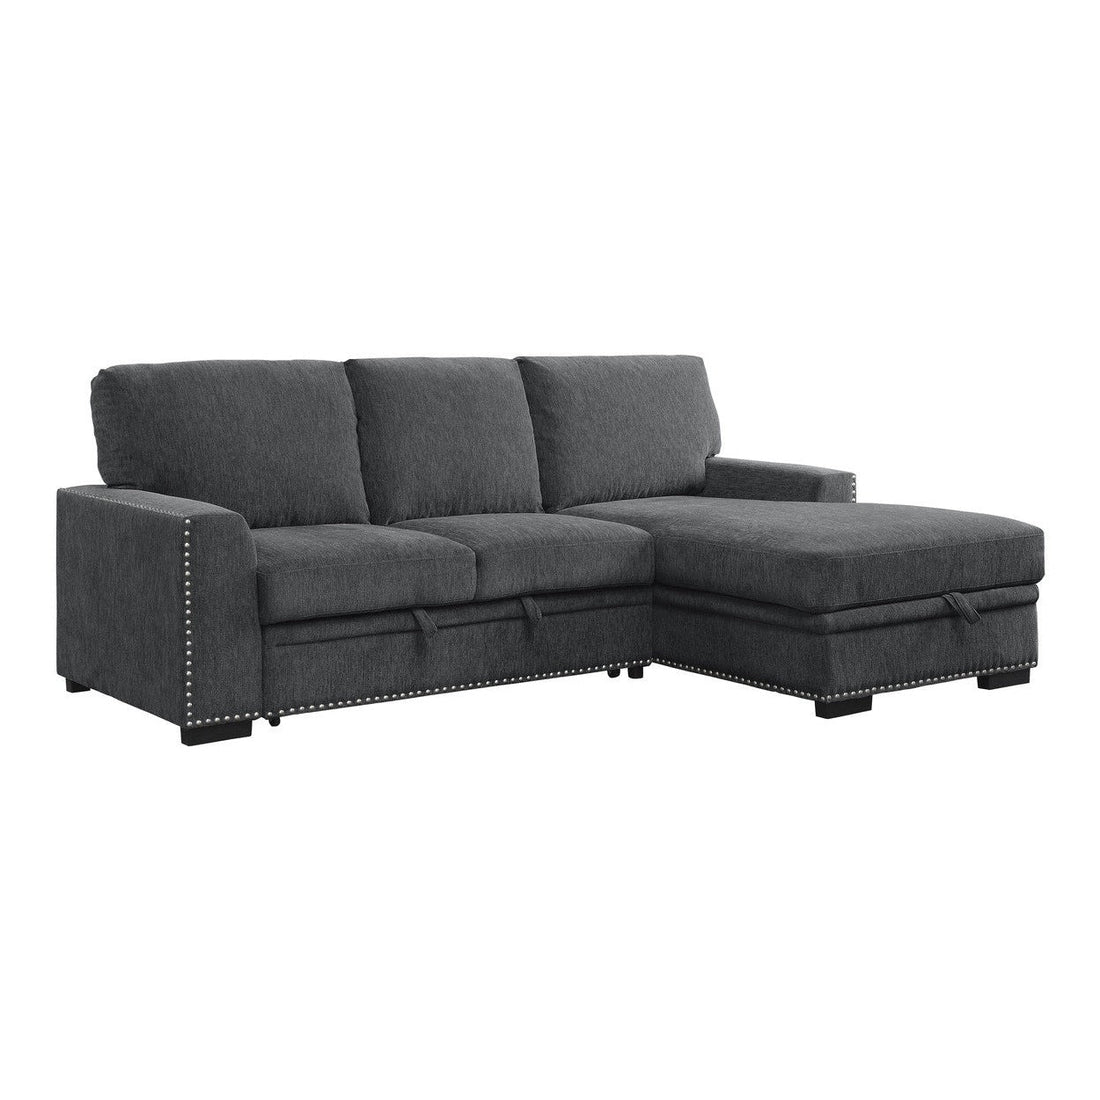 (2)2-Piece Sectional with Pull-out Bed and Right Chaise with Hidden Storage 9468CC*2RC2L